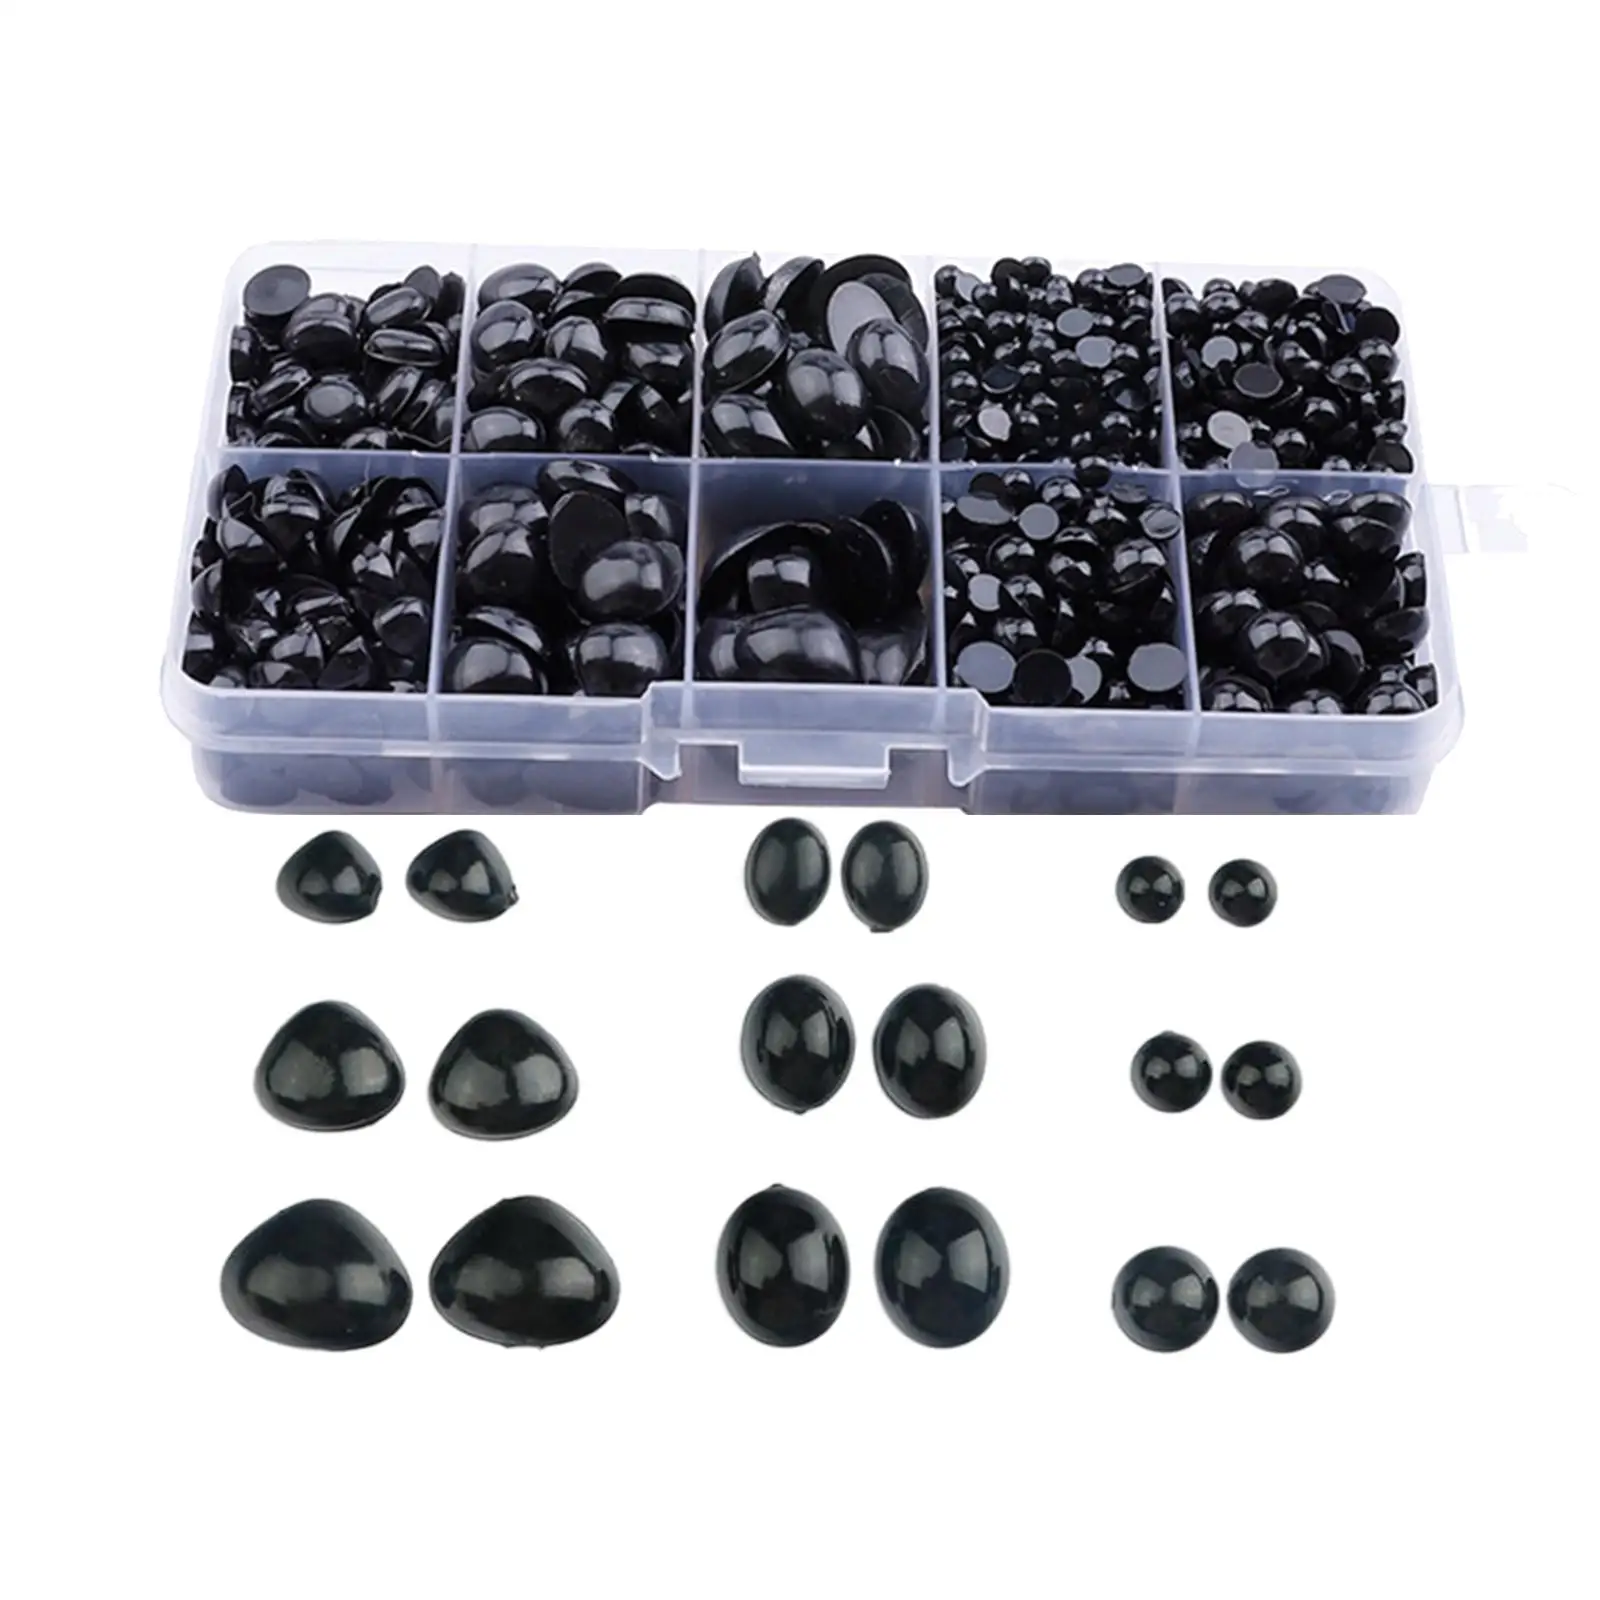 1000Pcs Black Plastic Safety Eyes and Noses DIY Crafts Half Round Cabochons Flat Bottomed Eyes Craft Doll Eyes for Bear Puppet